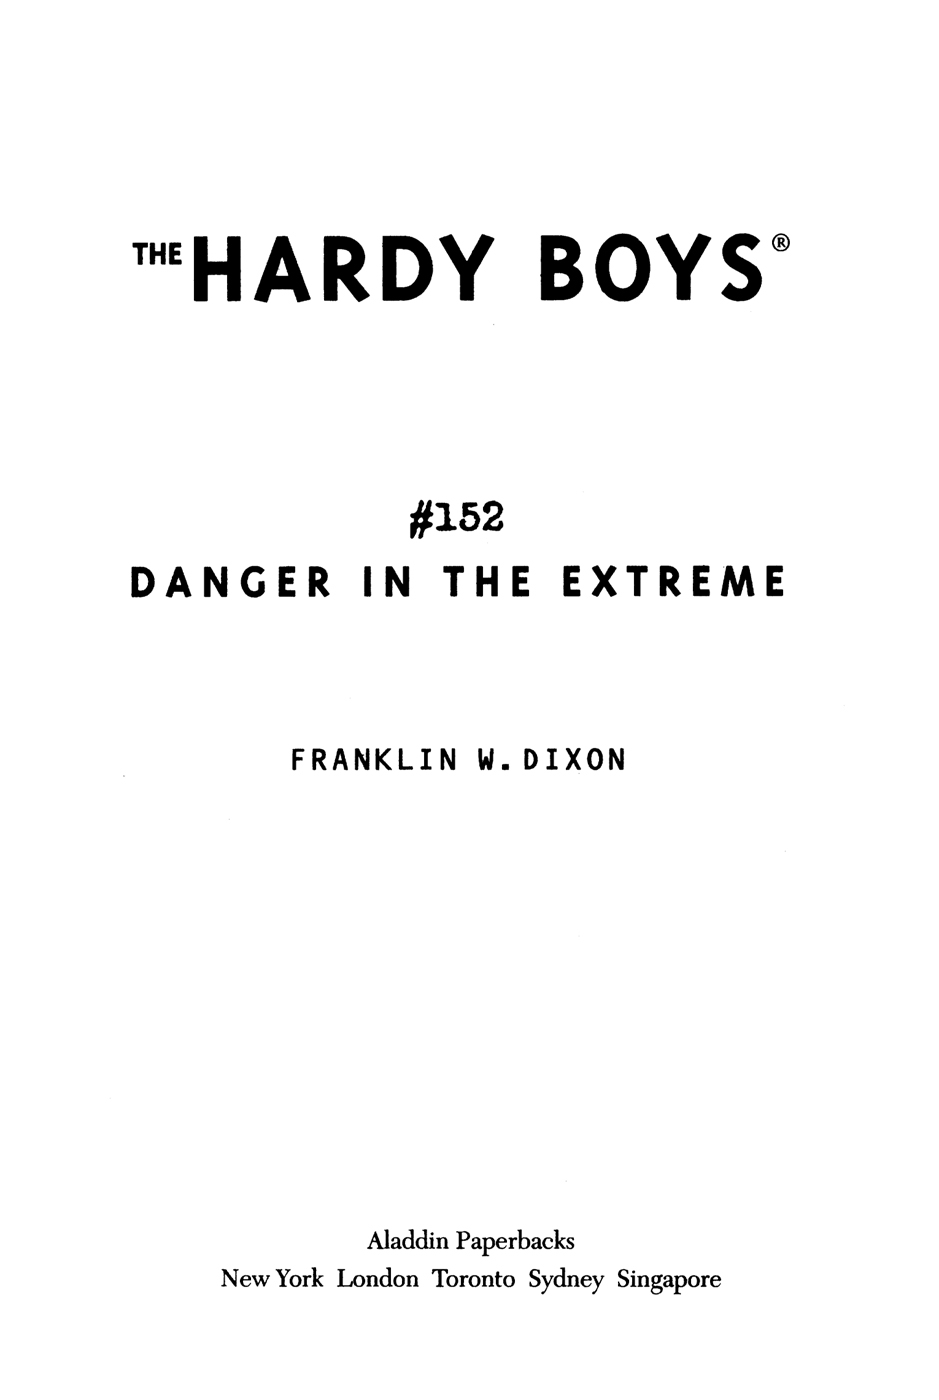 Danger in the Extreme by Franklin W. Dixon